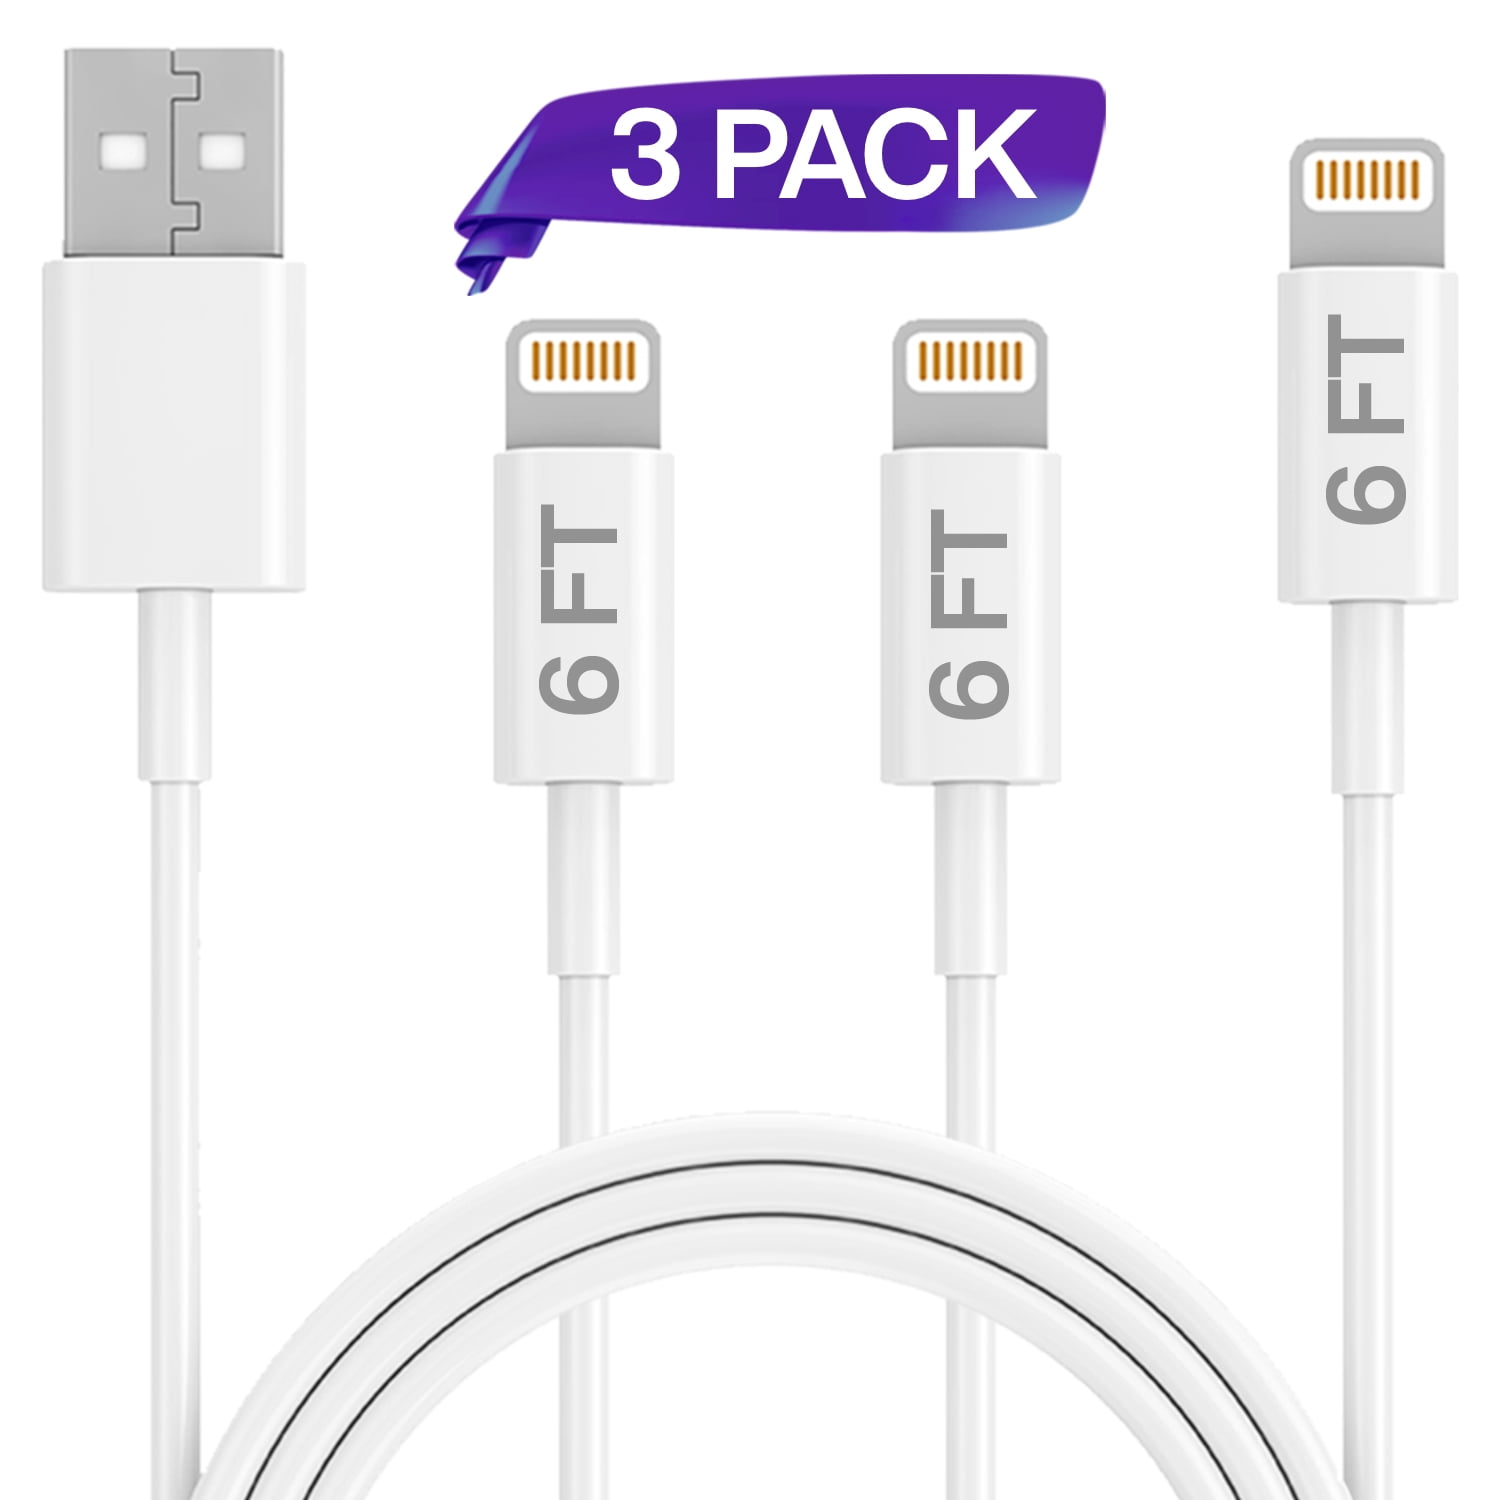 5-Pack 3/3/6/6/10FT iPhone Charger Cable,MFI Certified Lightning Cable Durable High Speed Nylon Braided USB Fast Charging Cord Compatible iPhone 11 Pro Max 11 Pro 11 Xs Max XR X 8 8 Plus 7 7 Plus 6S 6S Plus SE iPad iPod and More